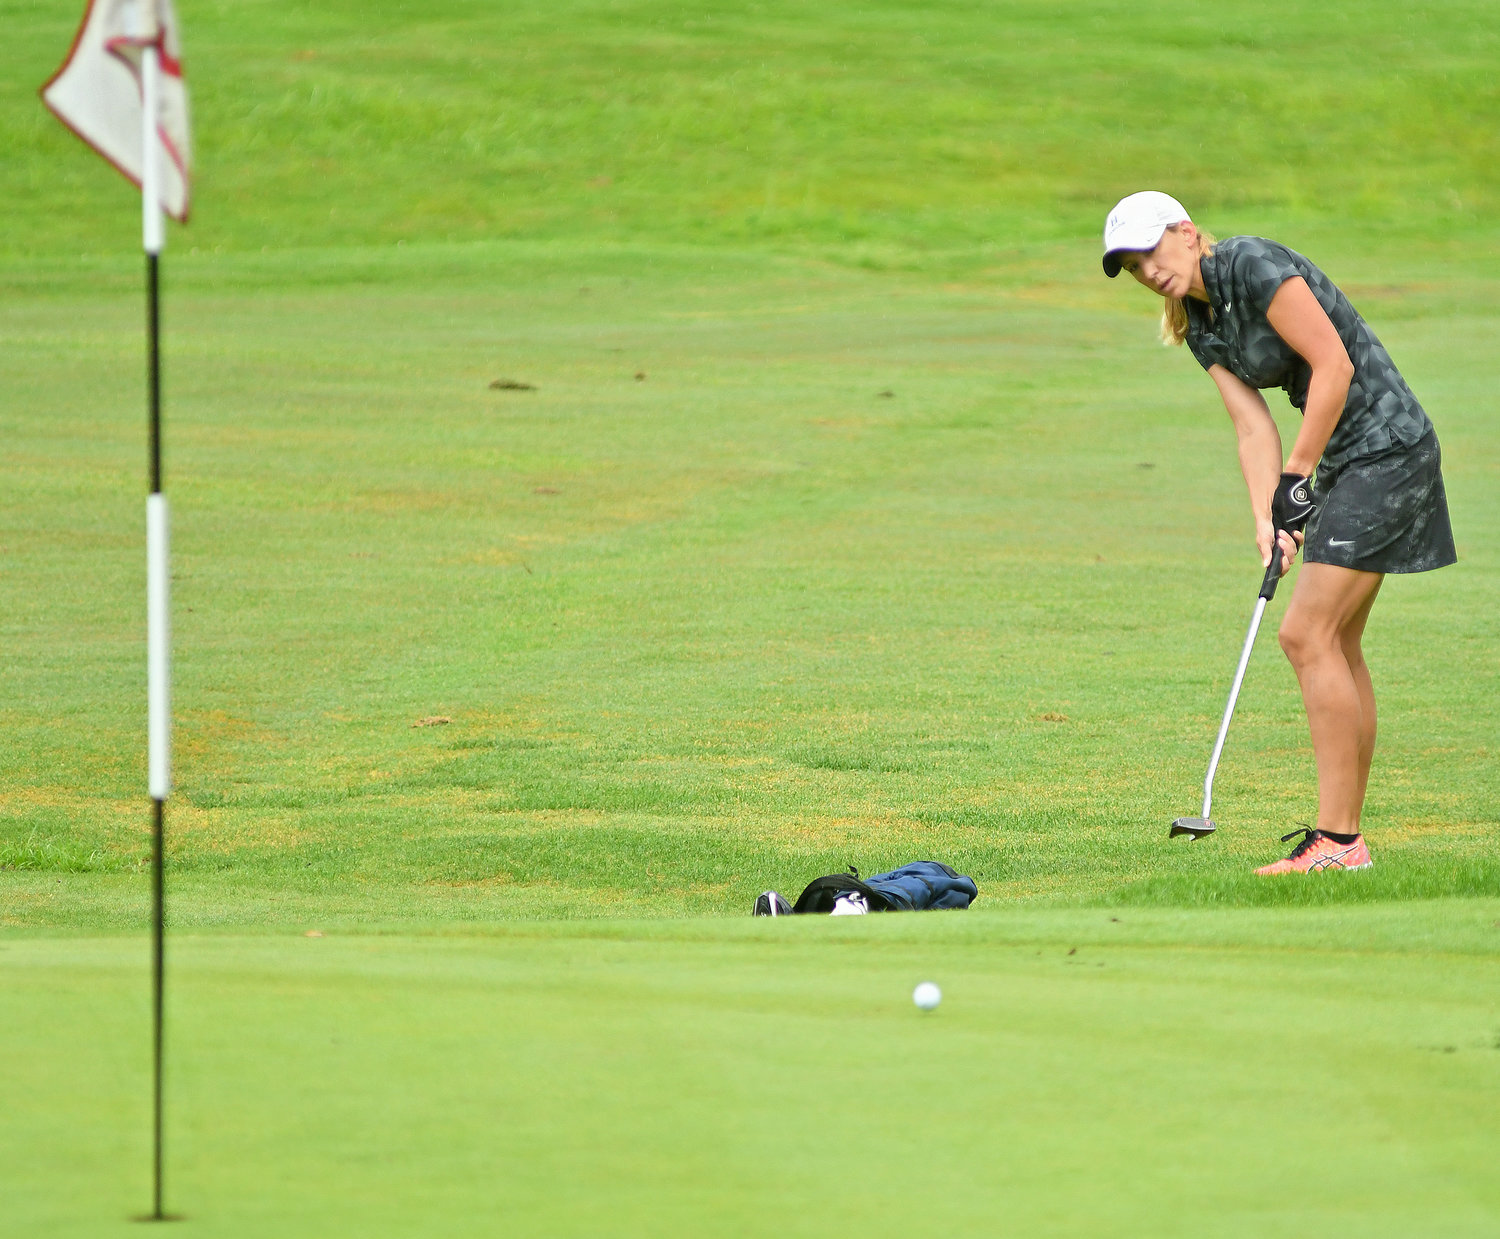 WATCHING THE PUTT — Rome's Lauren Cupp putts up to the fifth green during the second round of the Thirsty Owl New York Speedgolf Open on Monday at Rome Country Club. On Sunday at Teugega Country Club, Cupp set a new Women's Speedgolf World Record of 122:48, breaking the old one of 126:41. She shot a 72 and ran a time of 50:48 at Teugega.